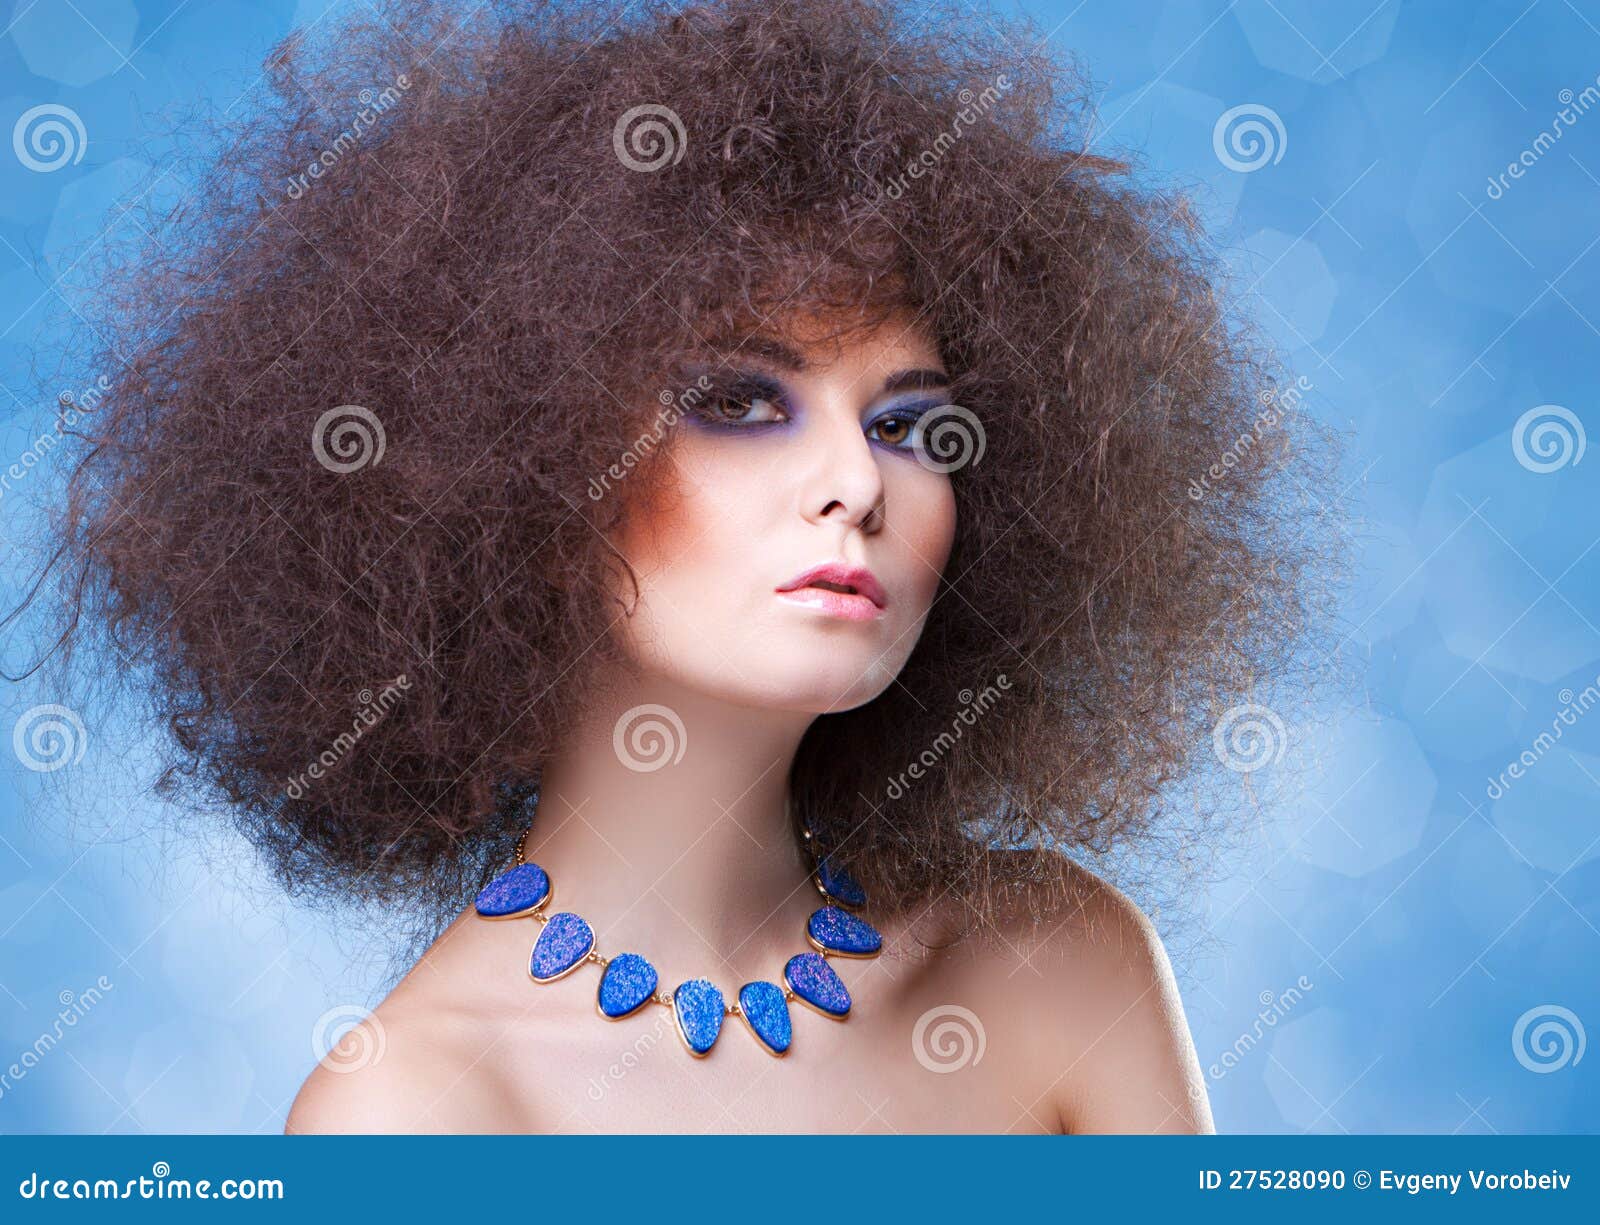 Blue hair color for curly hair - wide 2